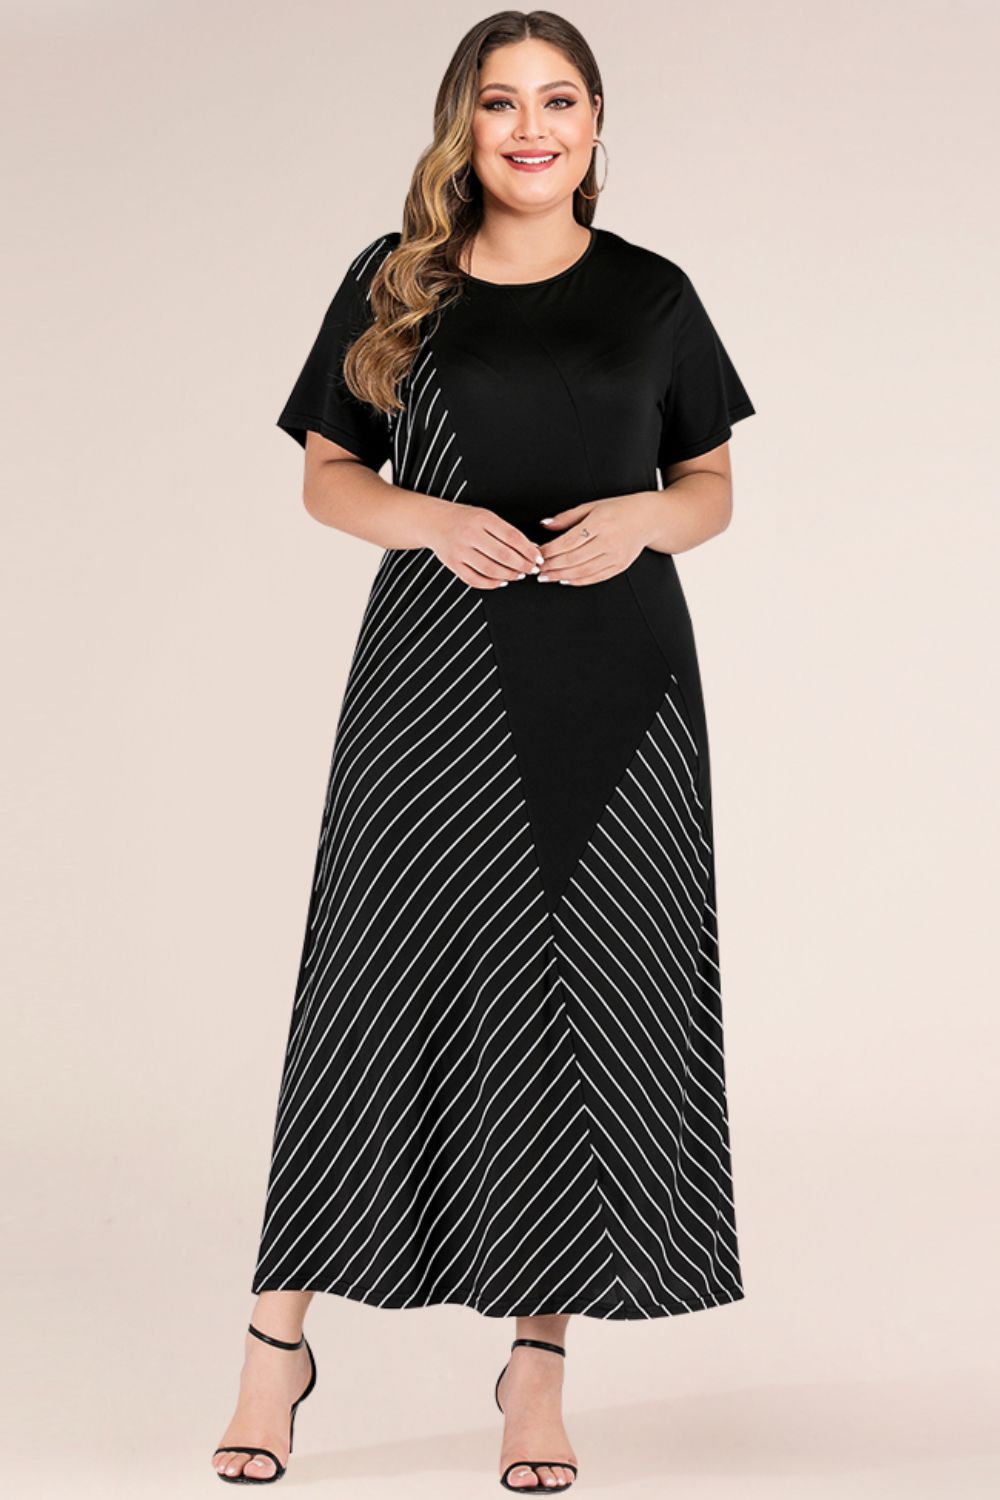 Elegant Plus Size Beach Wedding Guest Dress - Striped Color Block Tee Dress for Casual Summer Events, Flattering Fit for All Occasions